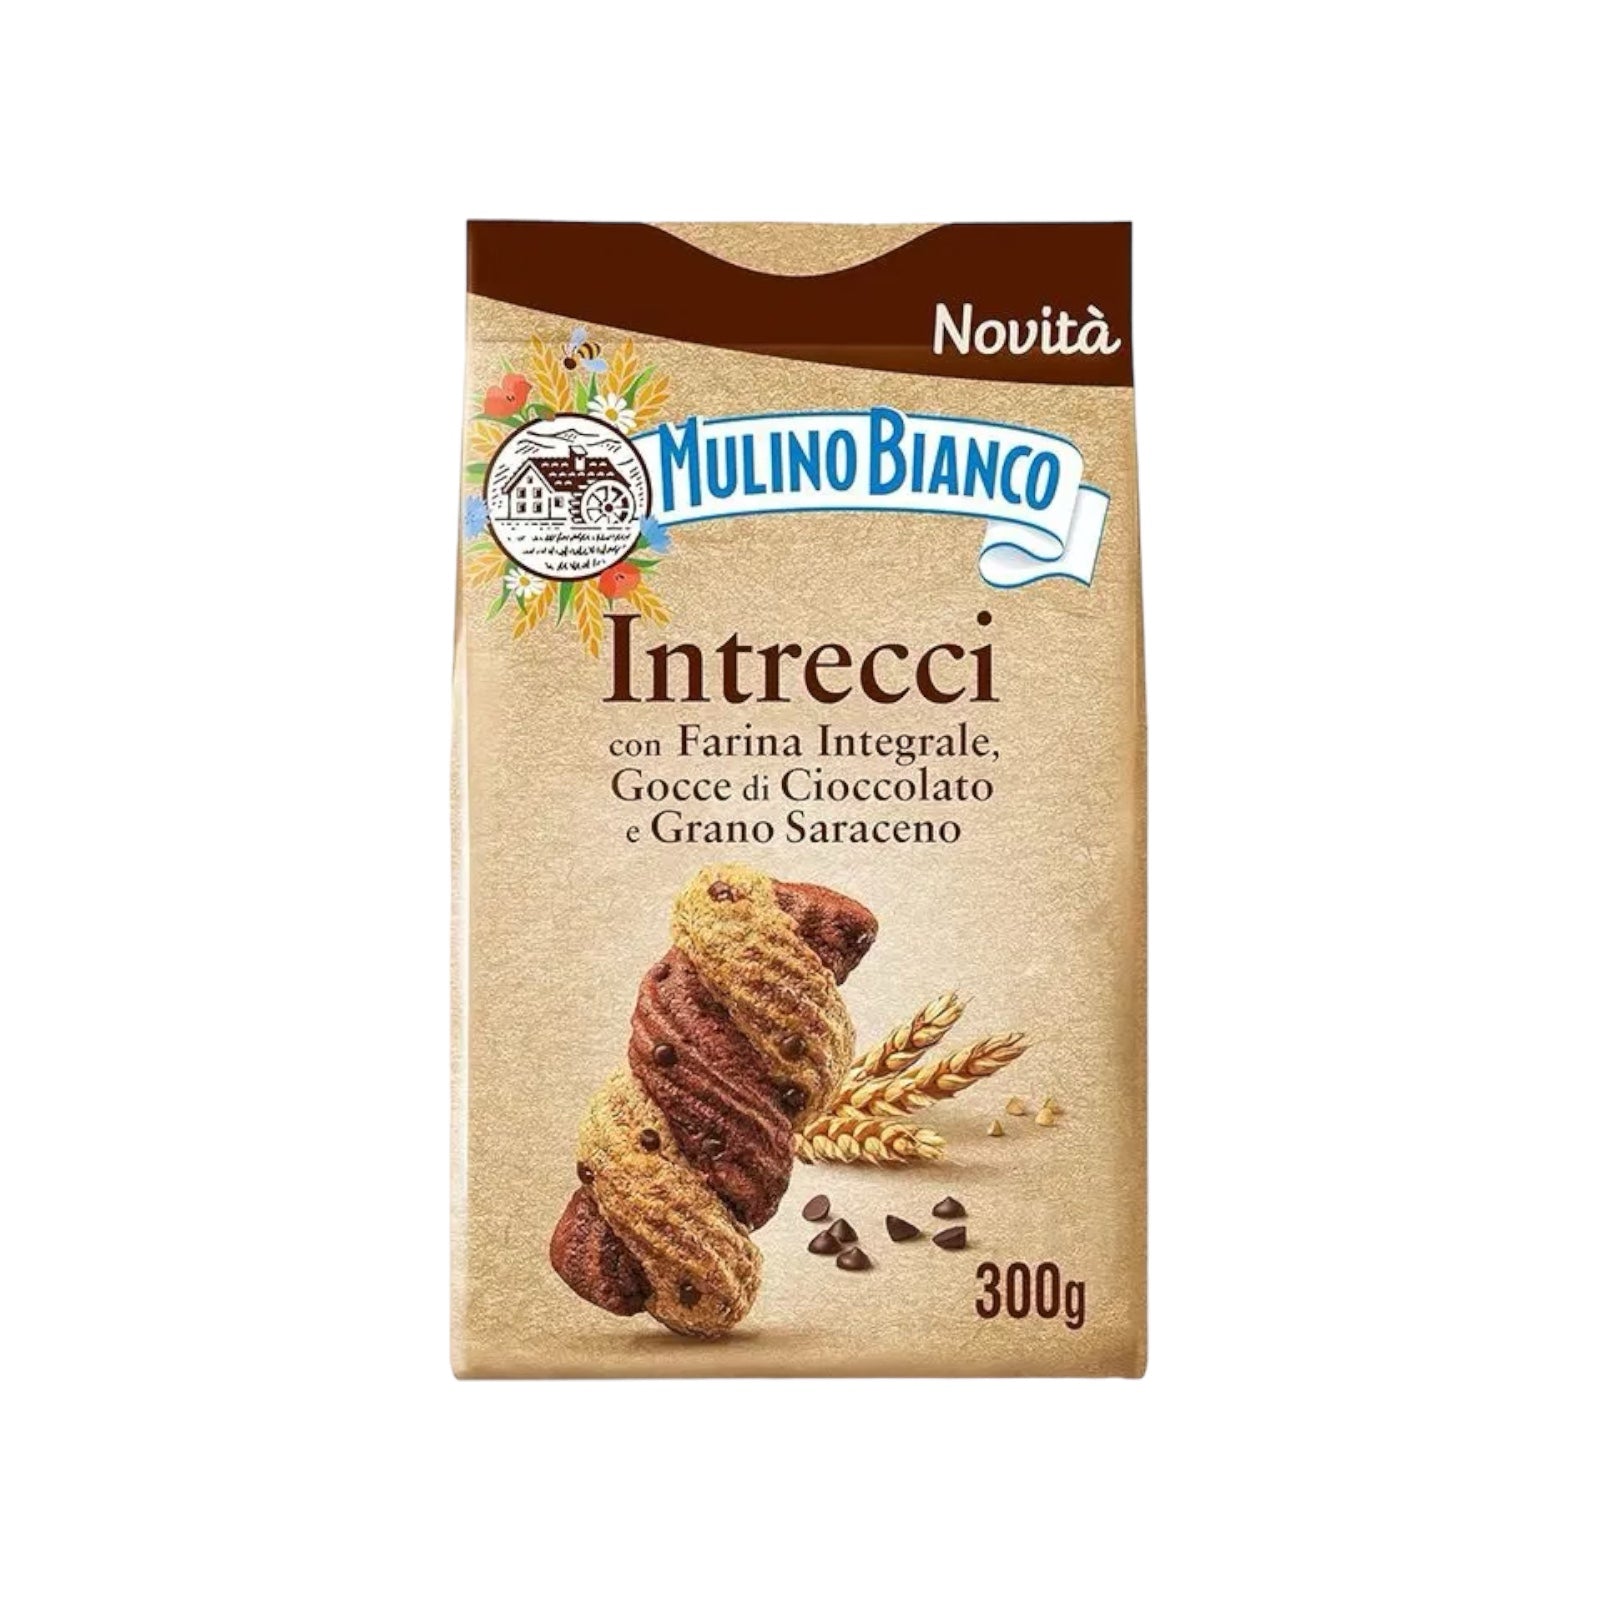 Mulino Bianco Intrecci Cookies With Whole Wheat Flour & Chocolates Chips